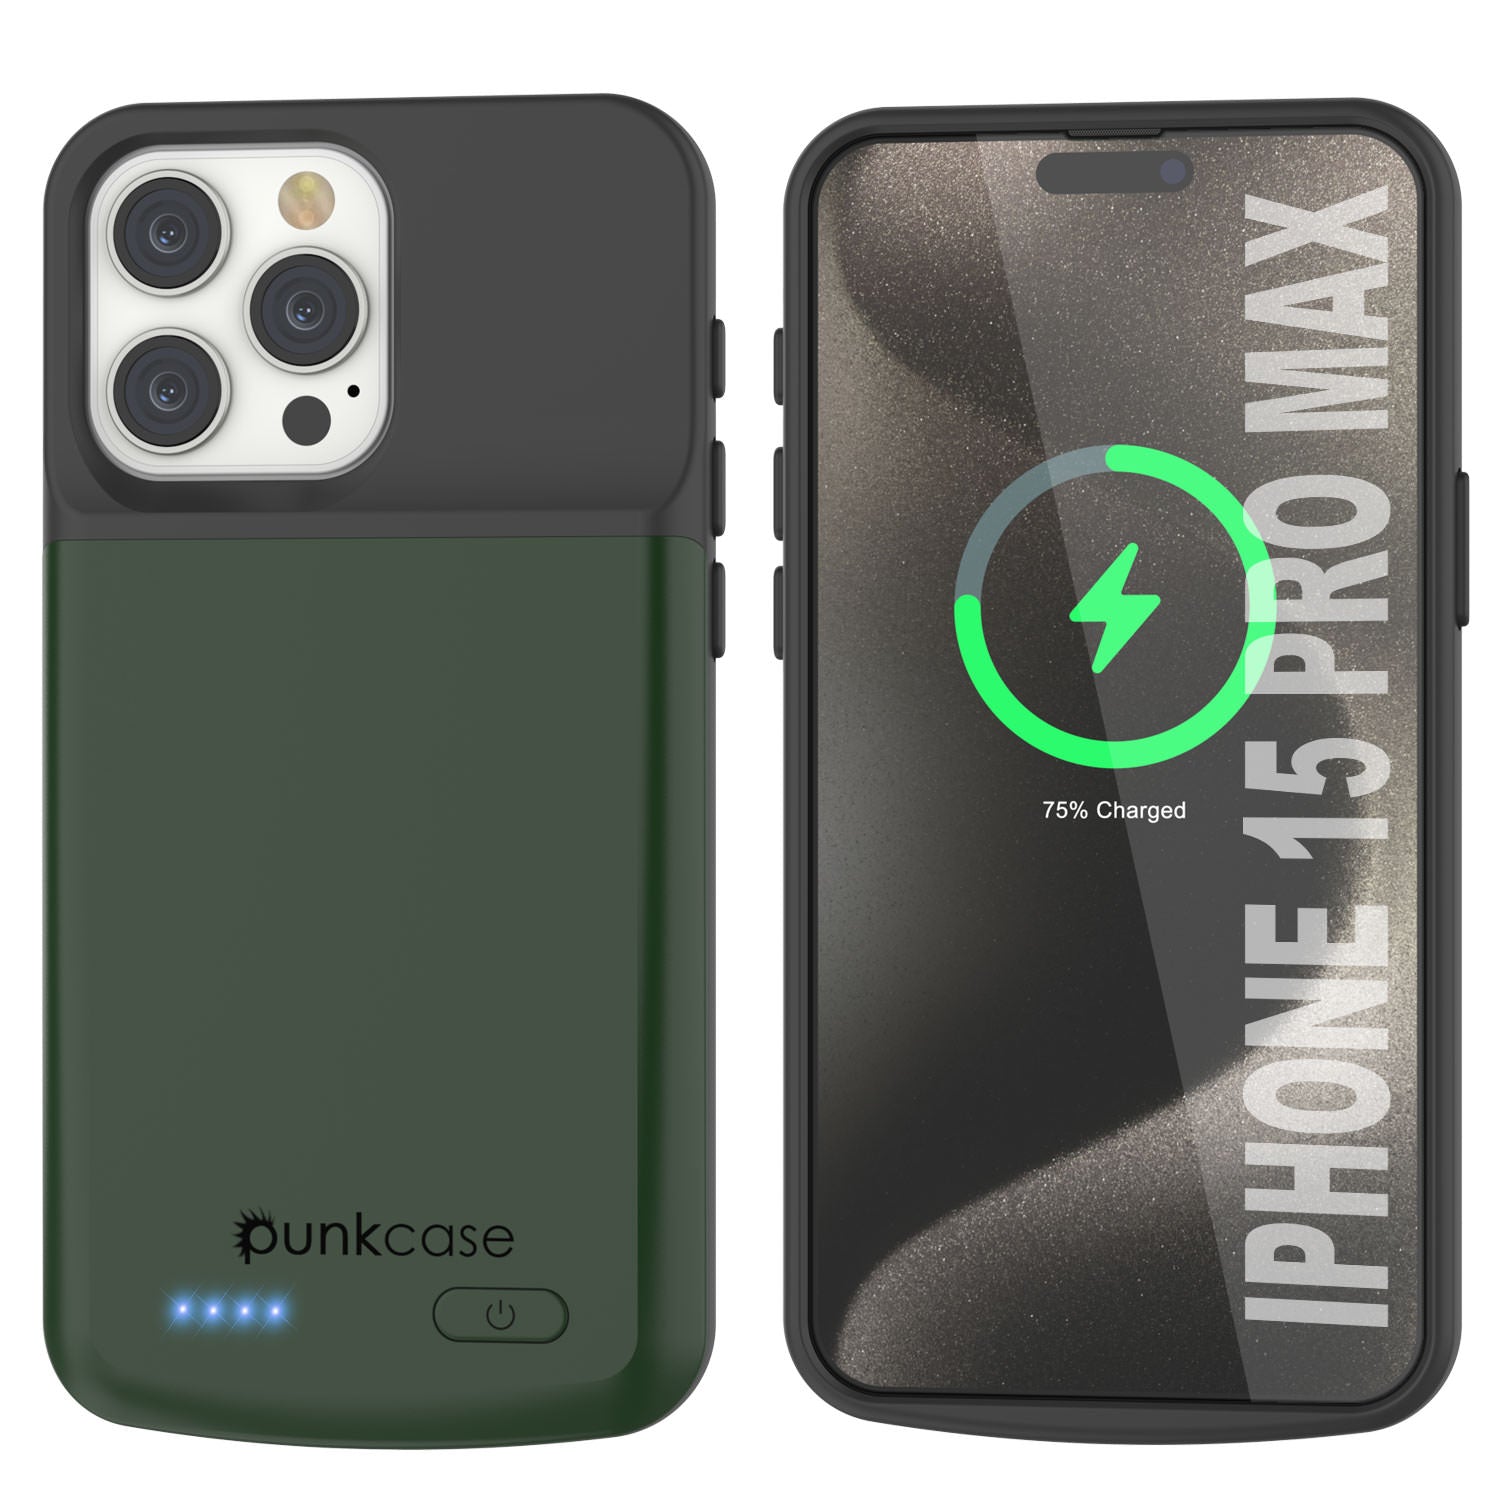 iPhone 15 Pro Max Battery Case, PunkJuice 5000mAH Fast Charging Power Bank W/ Screen Protector | [Green]